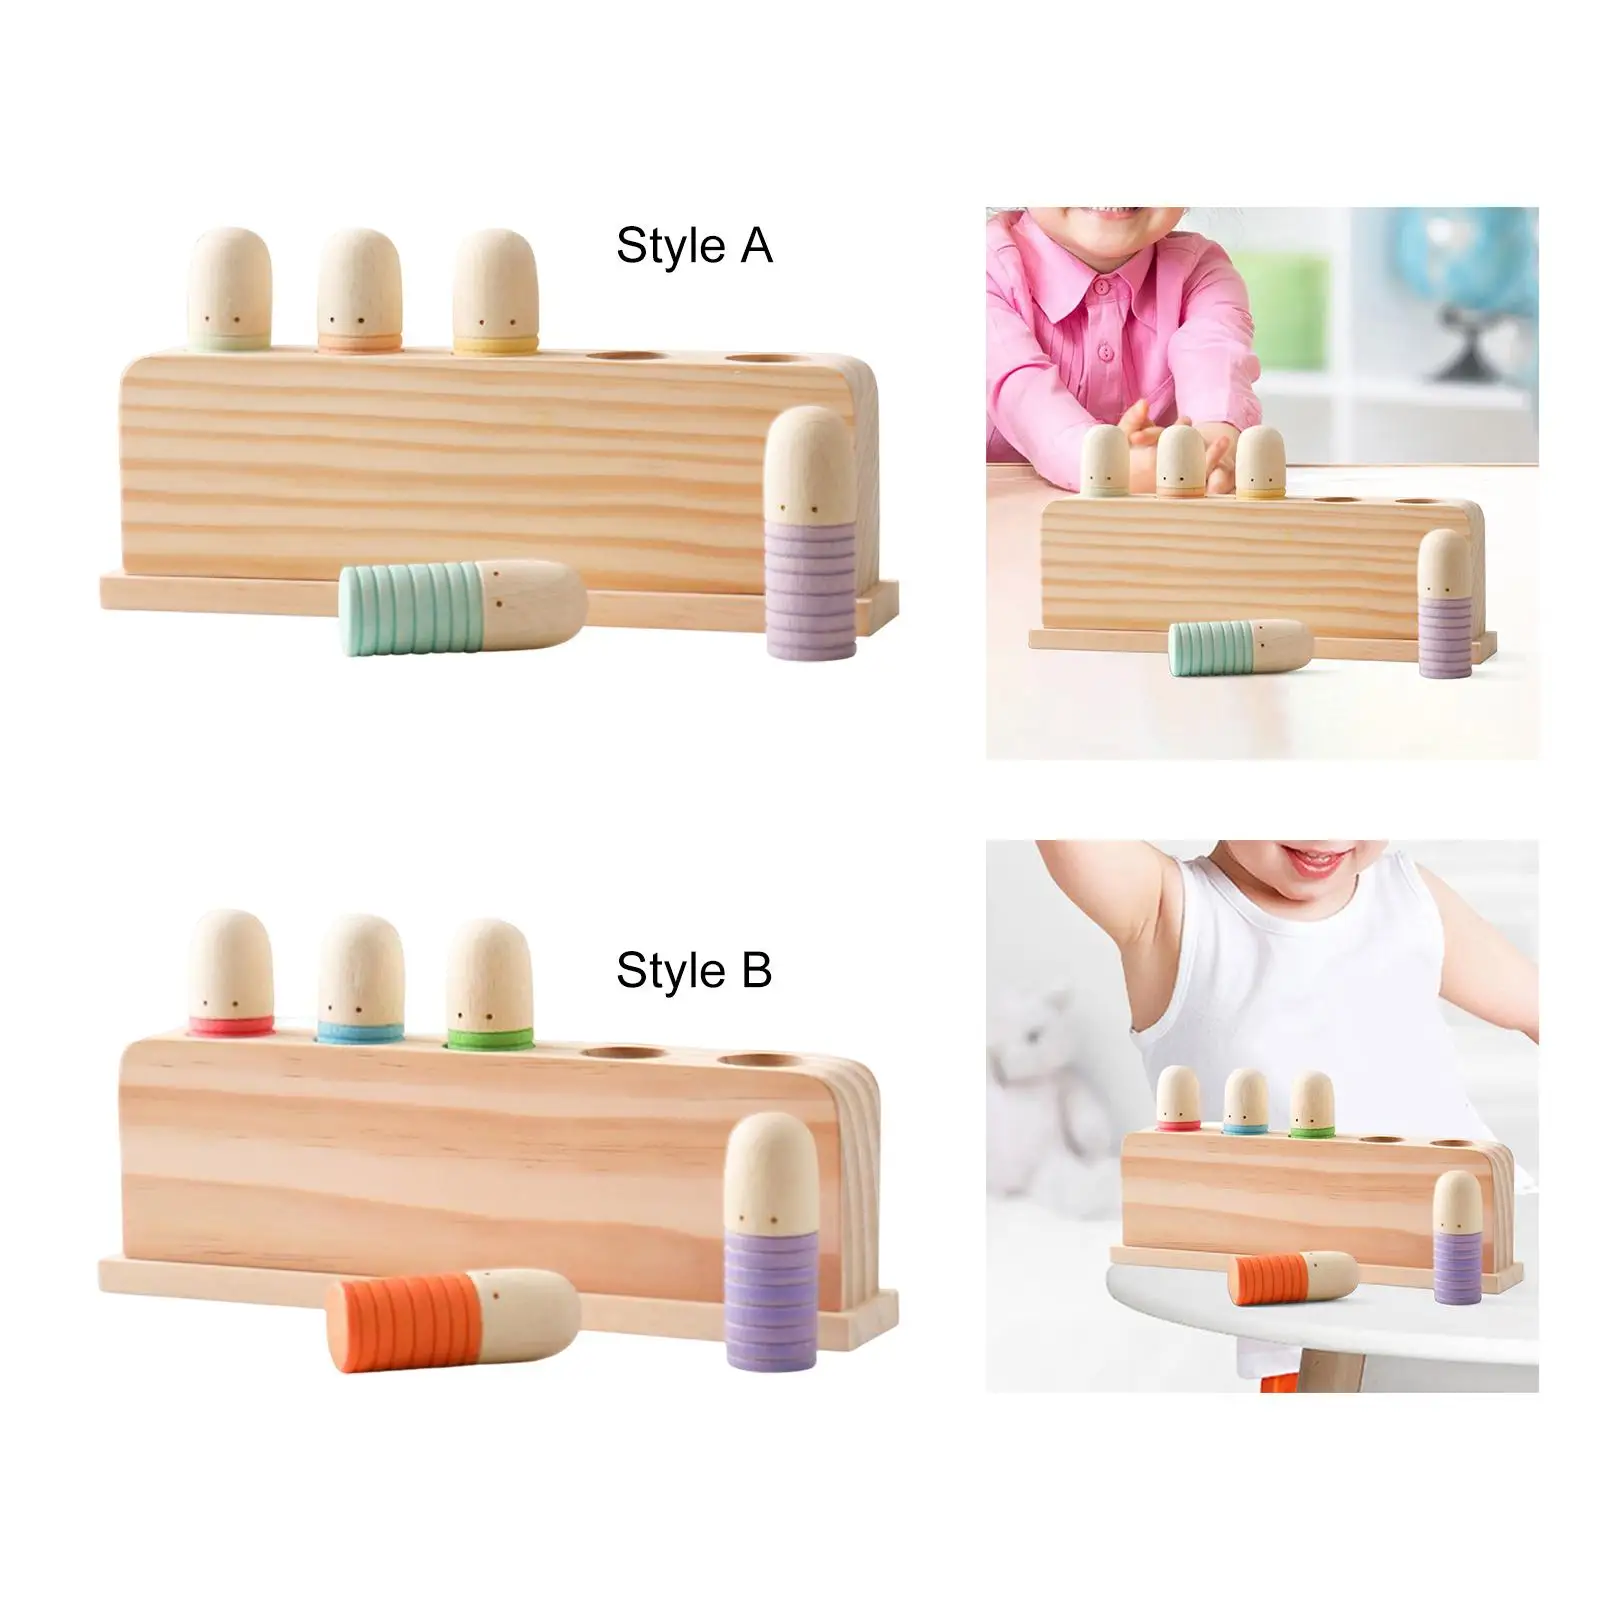 Wooden Rainbow Peg Dolls Shapes Sorting Toys for Toddler Kids Birthday Gifts